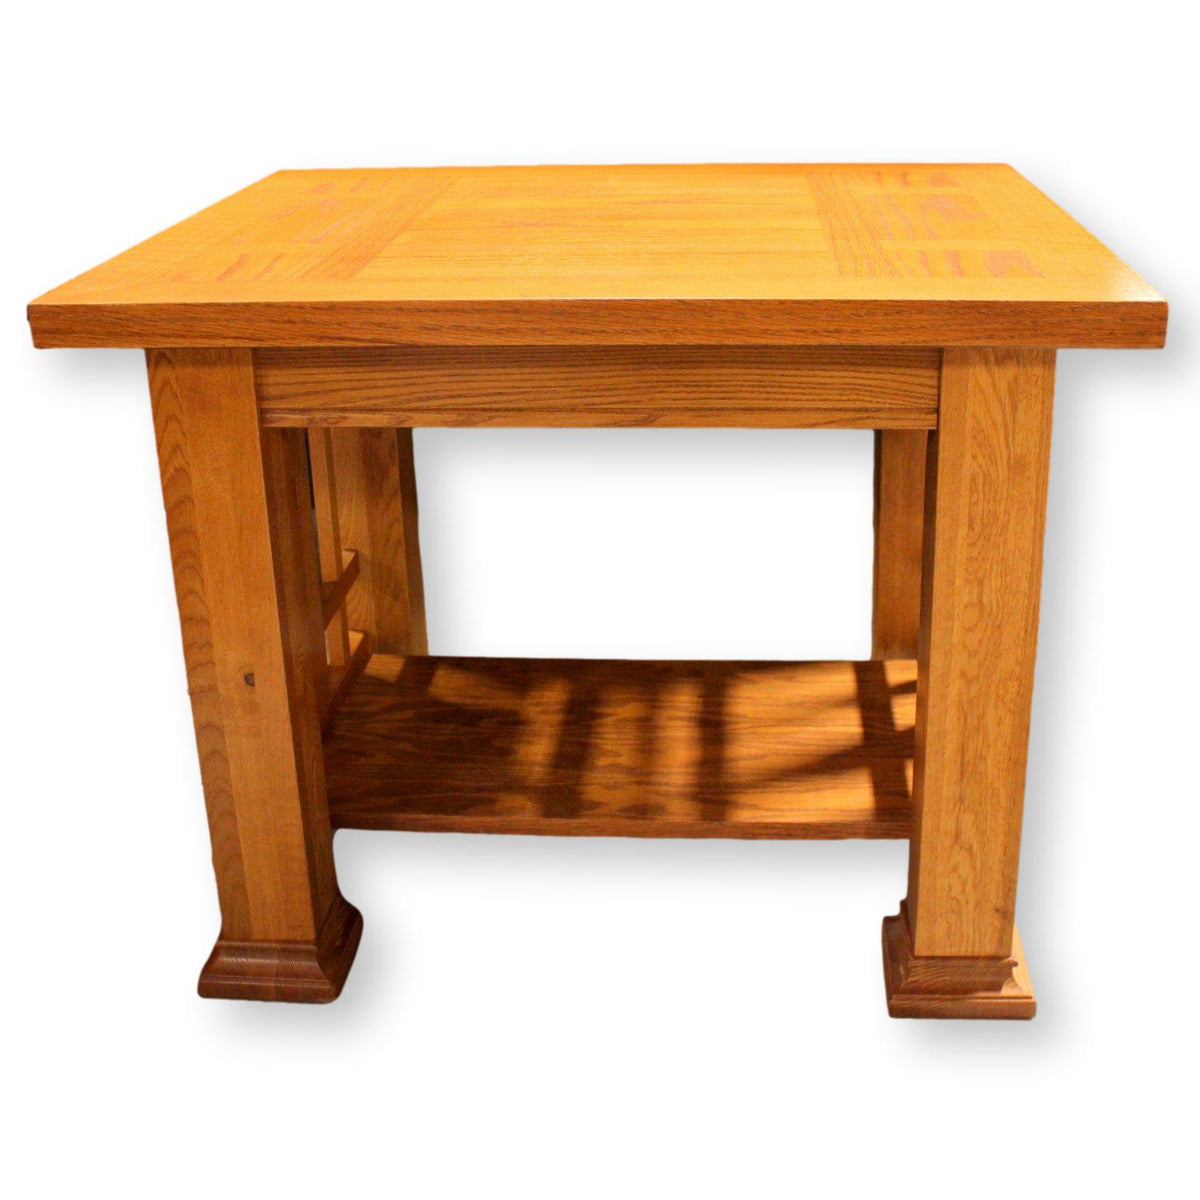 Oak Arts & Crafts Style End Table